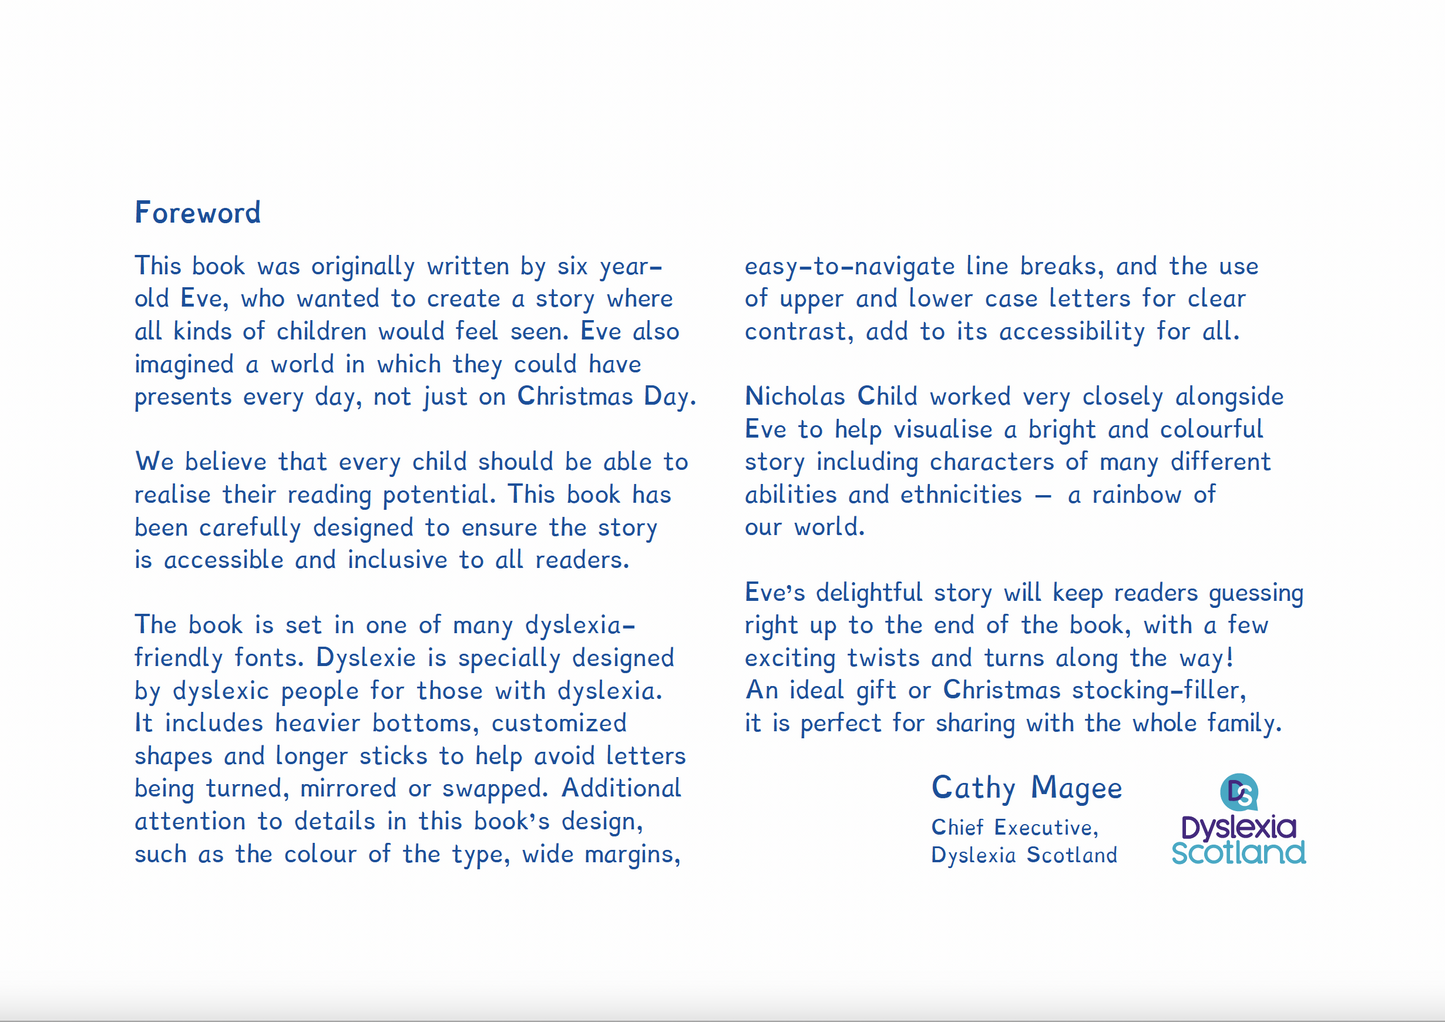 Foreword by Dyslexia Scotland. Foreword This book was originally written by six yearold Eve, who wanted to create a story where all kinds of children would feel seen. Eve also imagined a world in which they could have presents every day, not just on Christmas Day. We believe that every child should be able to realise their reading potential. This book has been carefully designed to ensure the story is accessible and inclusive to all readers.